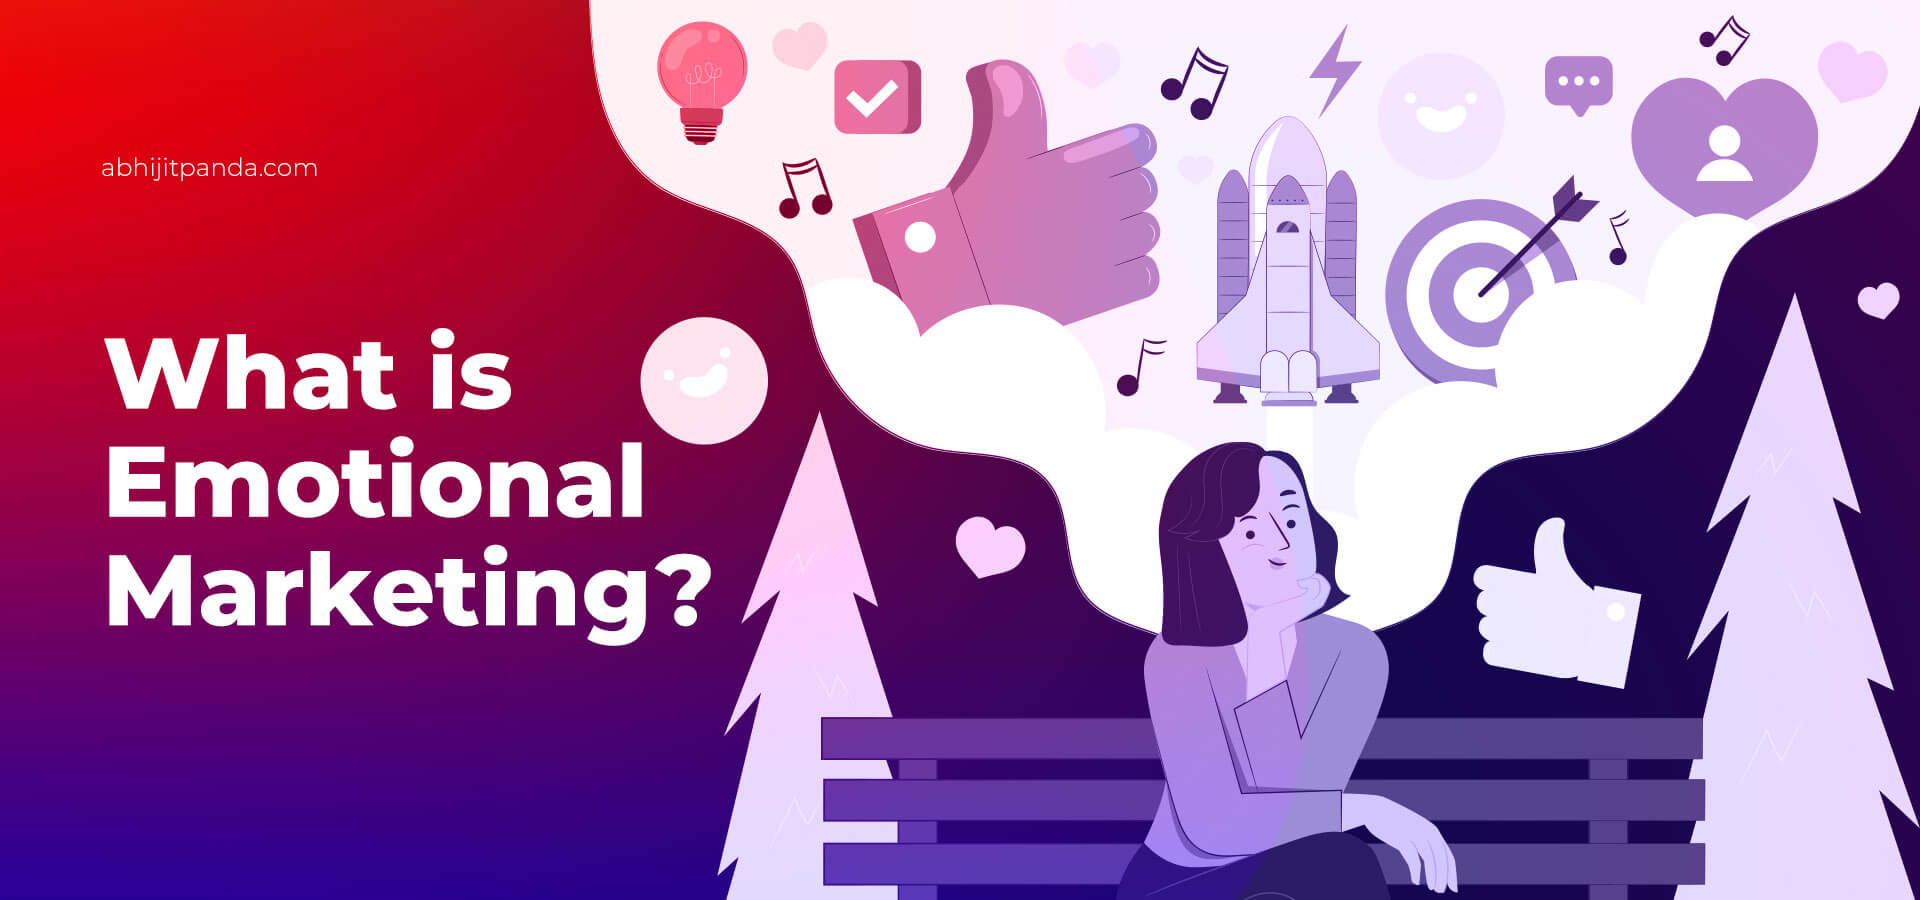 What is Emotional Marketing